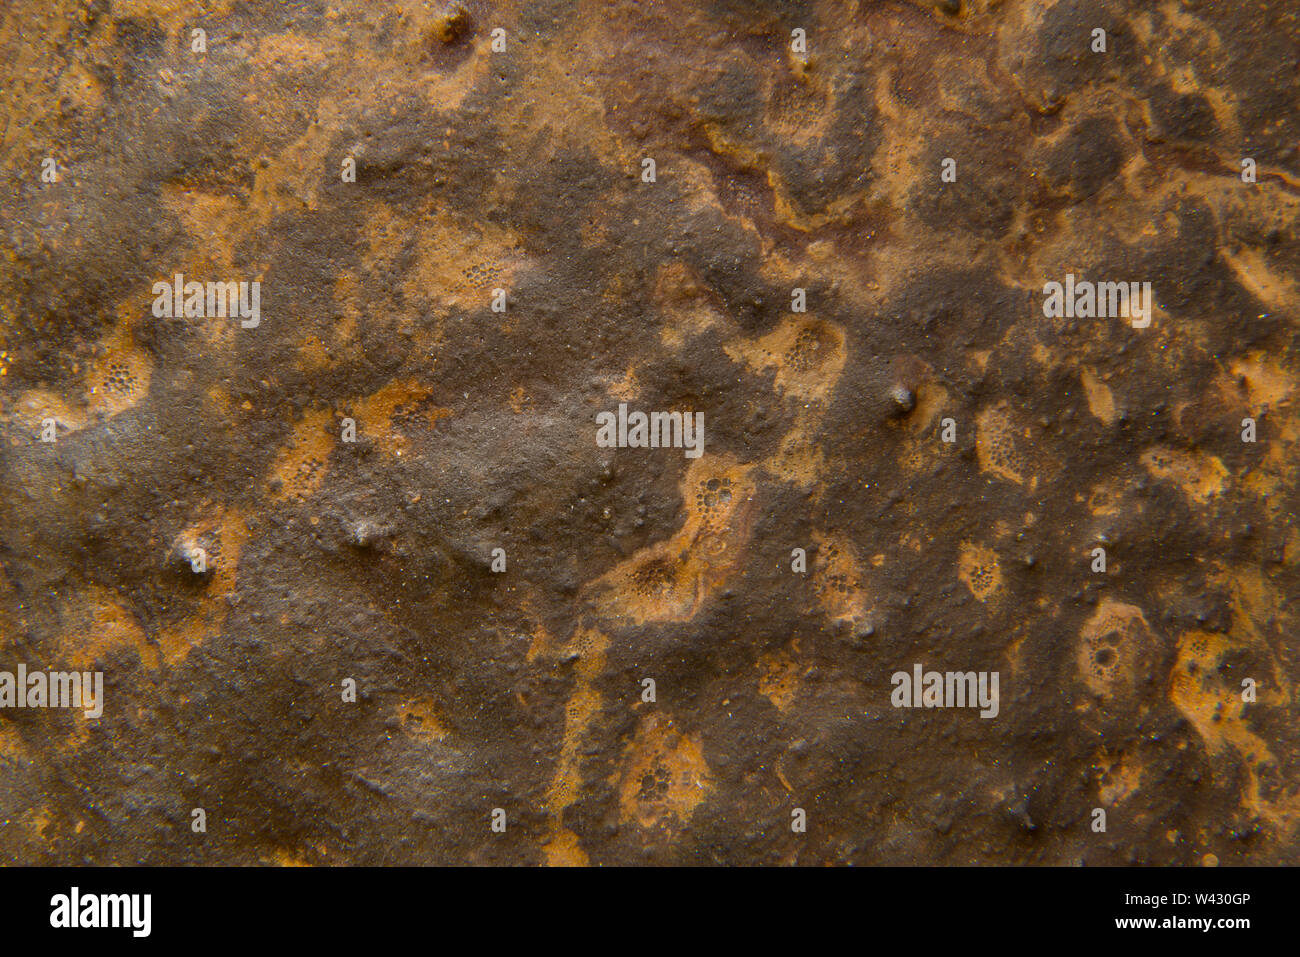 Creative background texture with rusty metal look adding to the gruny texture. Stock Photo